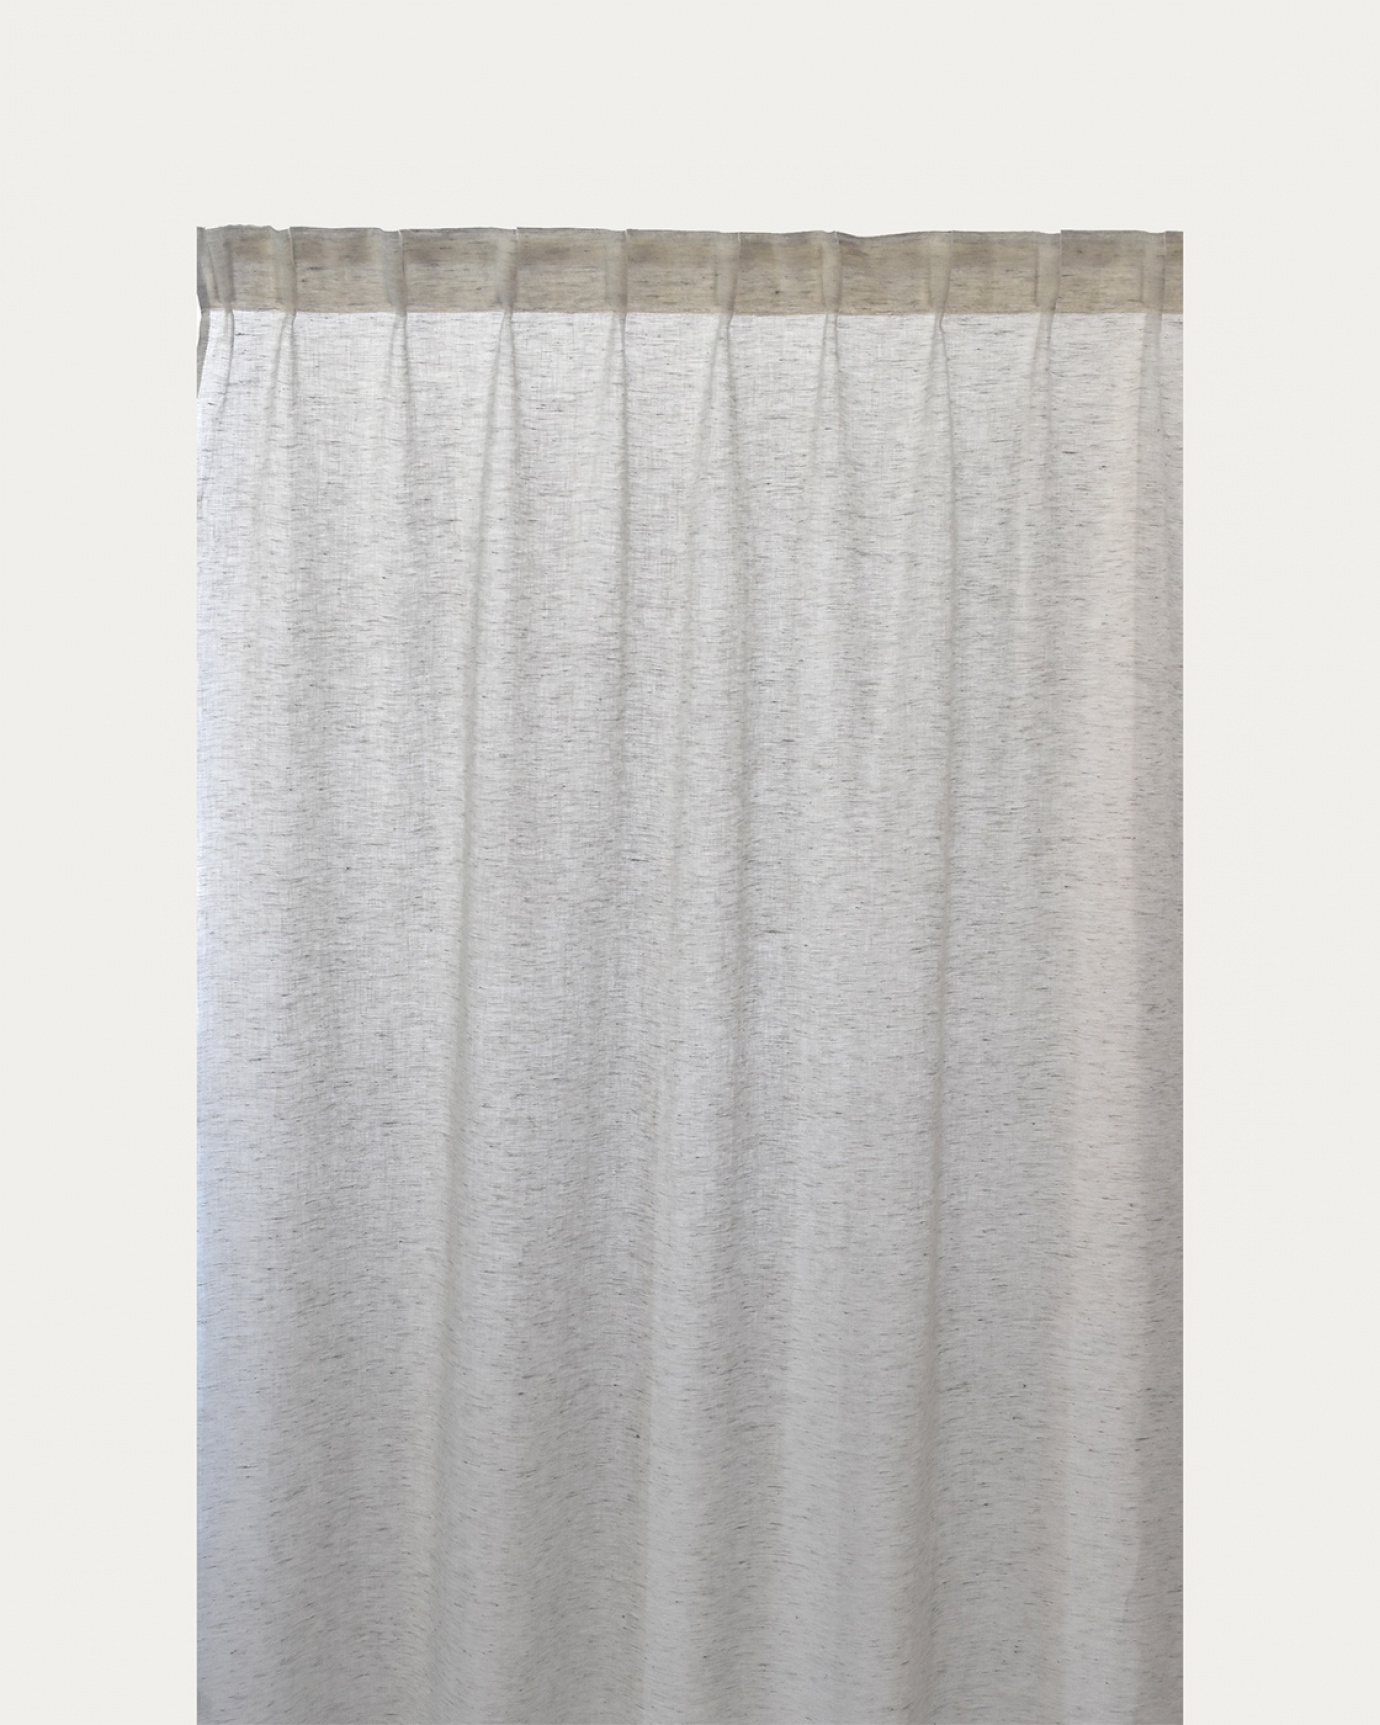 Product image light stone grey INTERMEZZO curtain of sheer linen with finished pleat tape from LINUM DESIGN. Size 140x290 cm and sold in 2-pack.